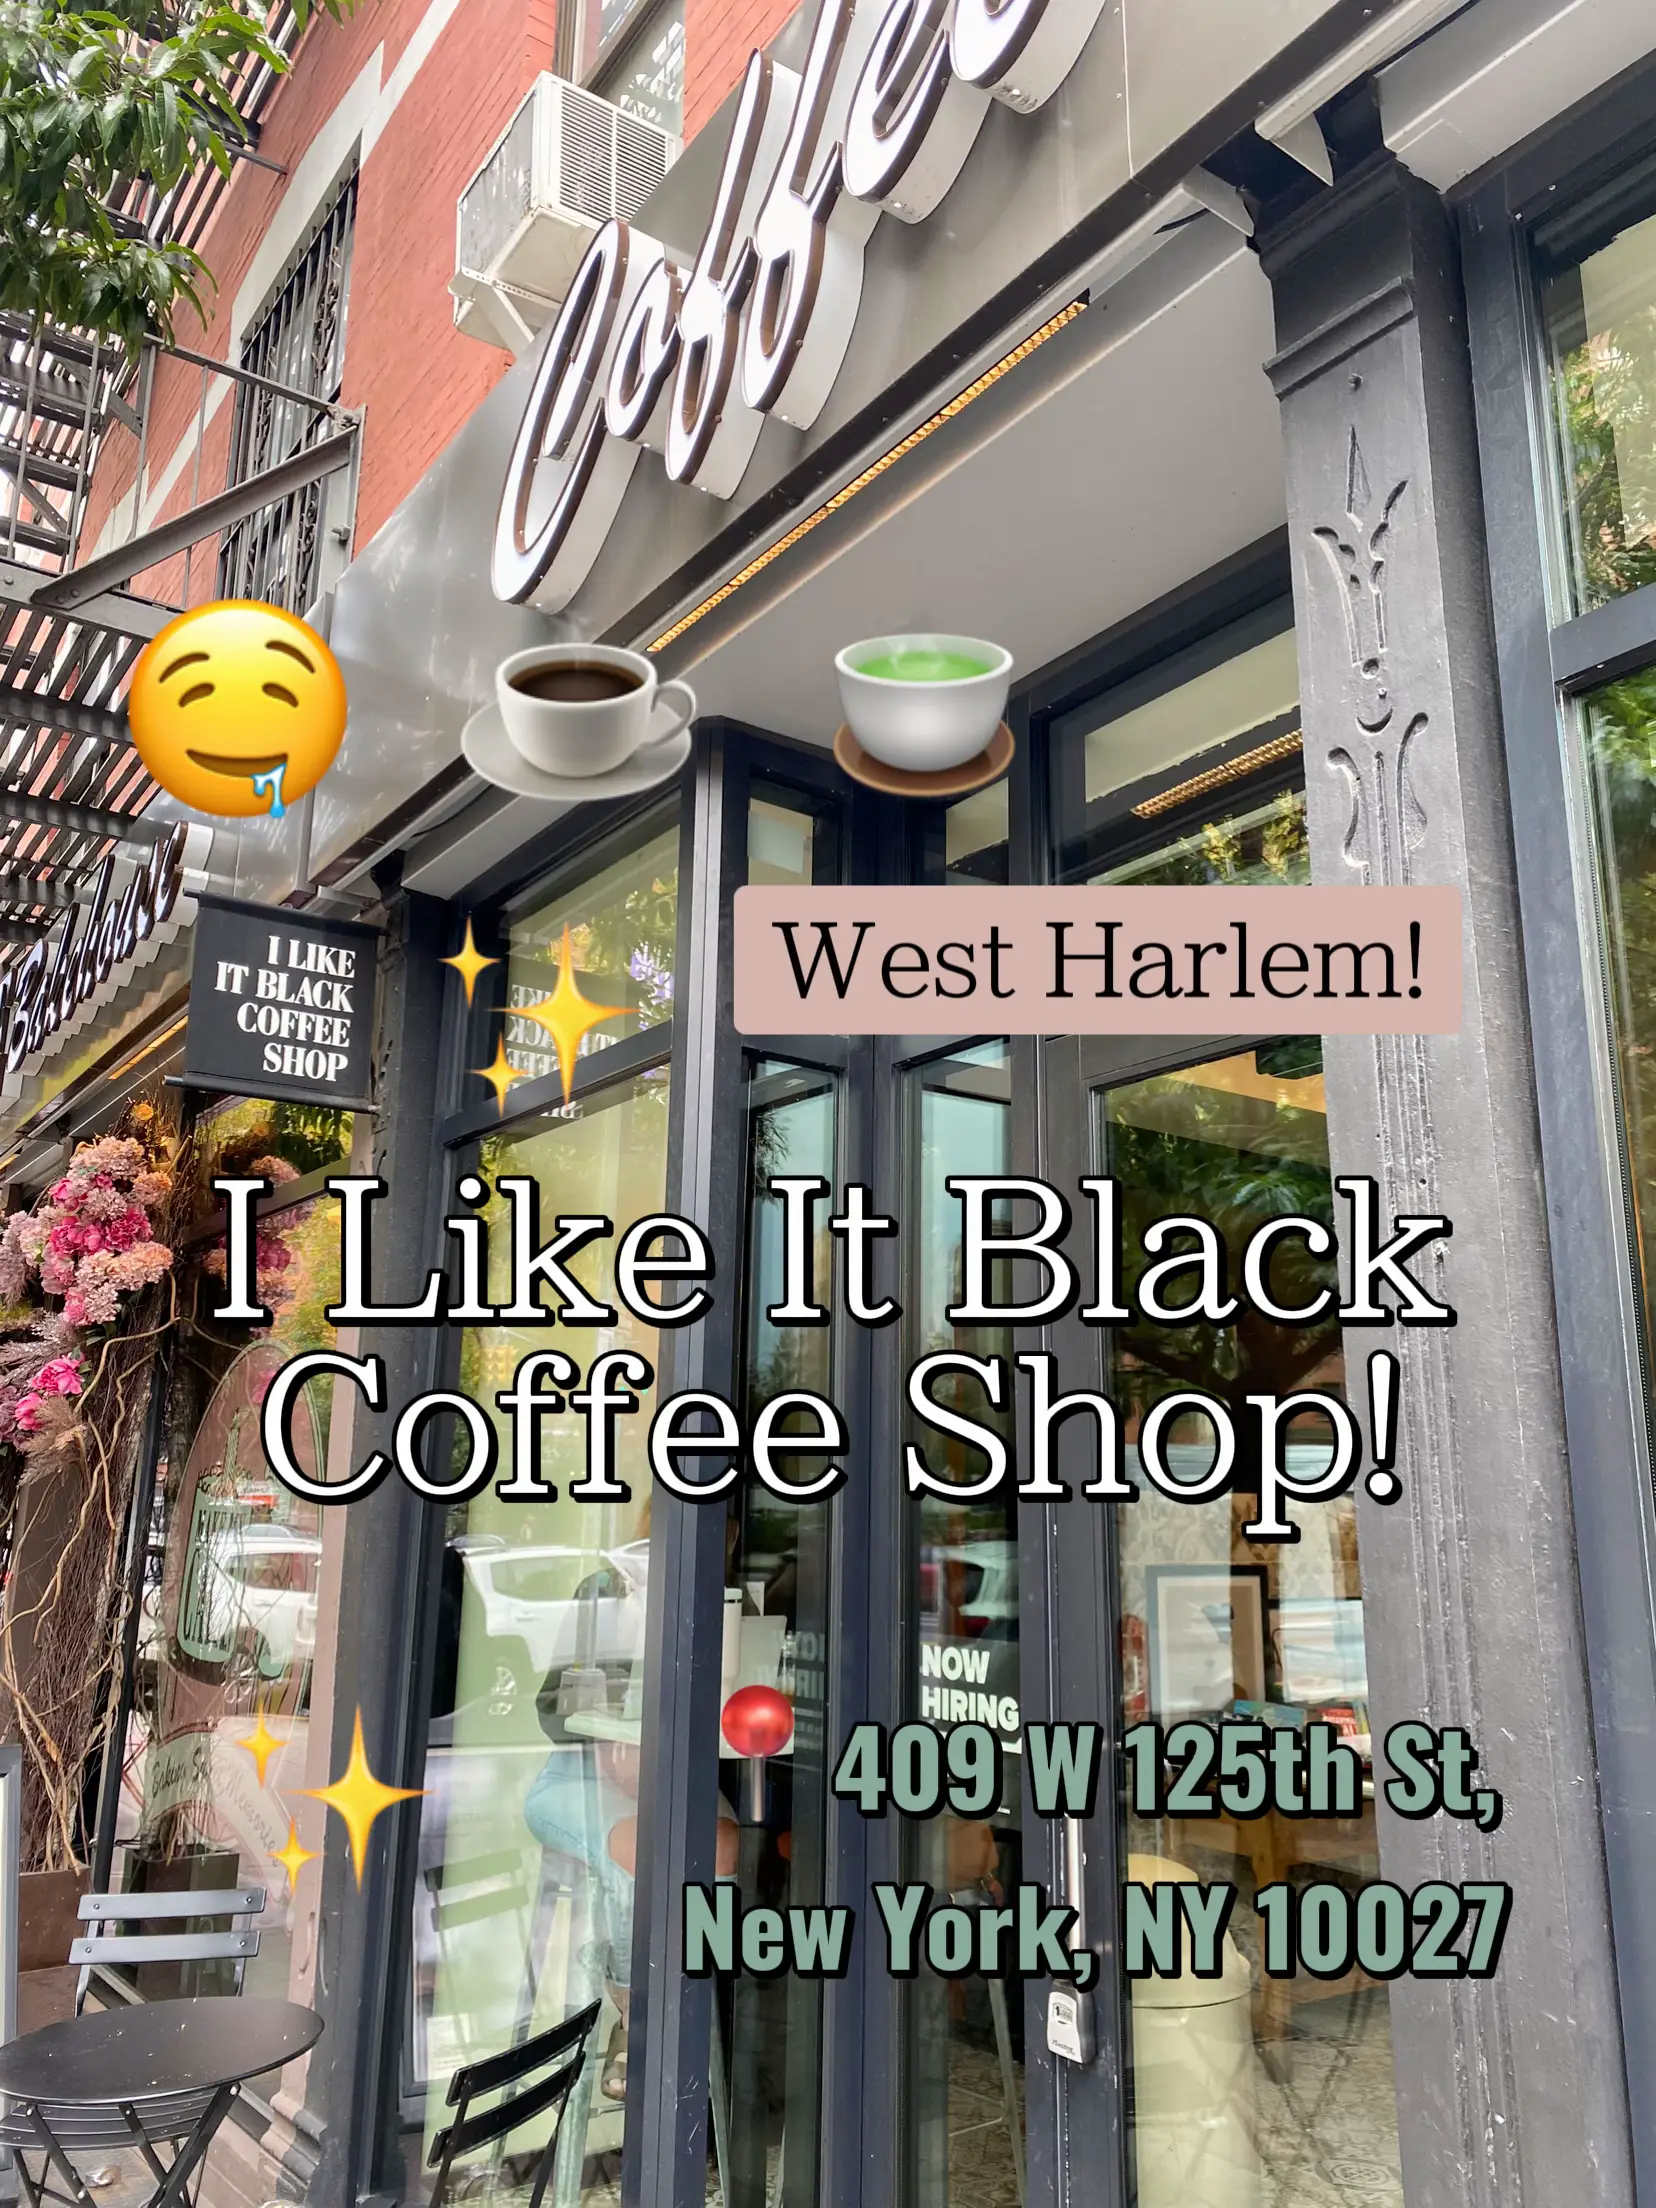  A coffee shop with a green awning and a sign that says "I like it black coffee shop".